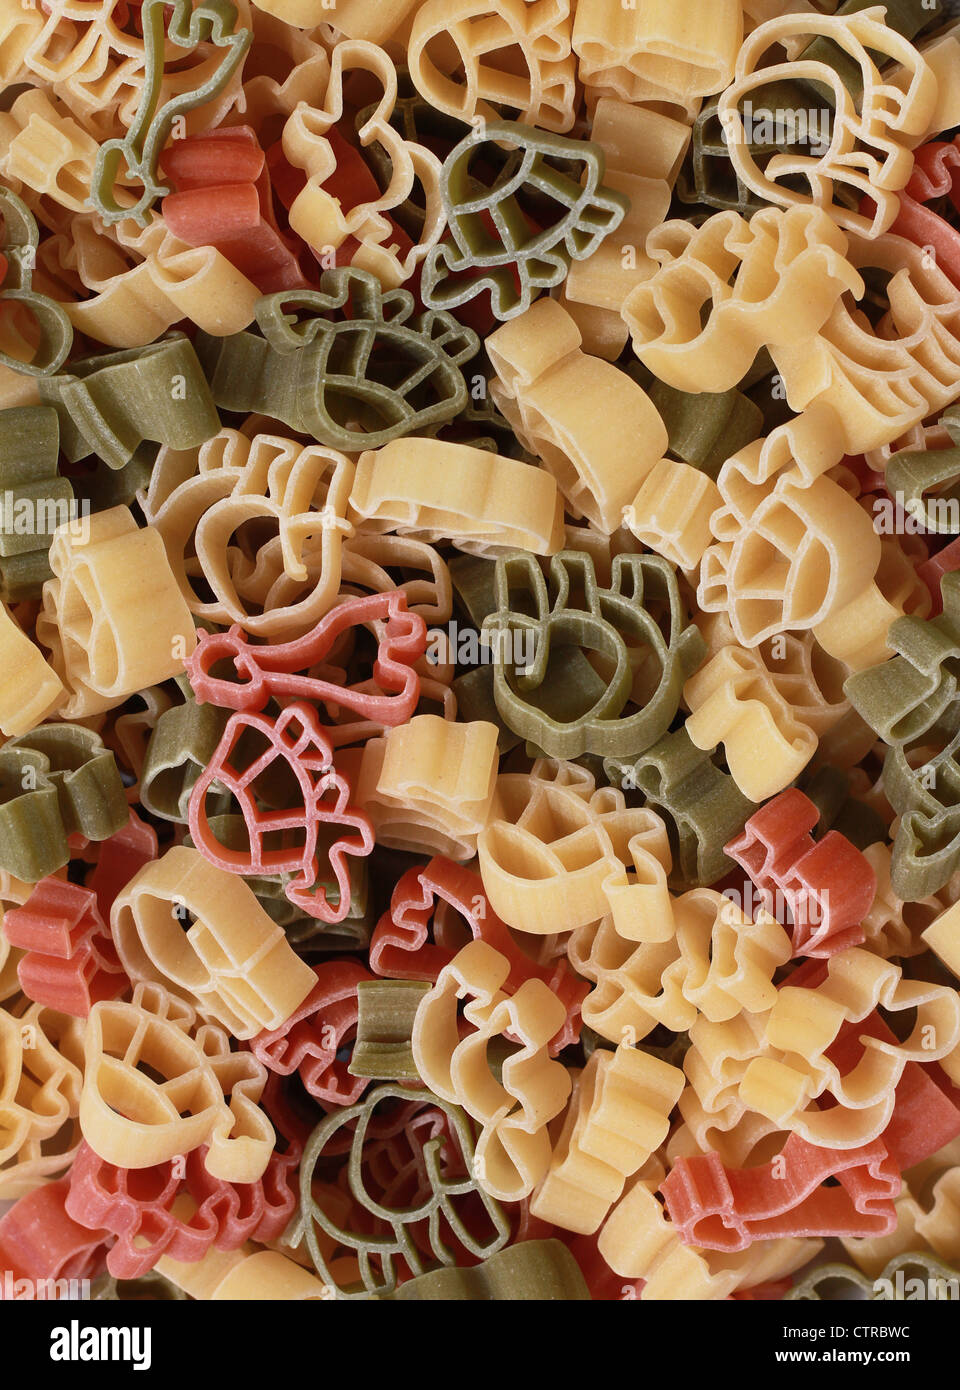 Italian pasta of durum wheat semolina with tomato and spinach in form of various zoo animals. Funny for children. Stock Photo